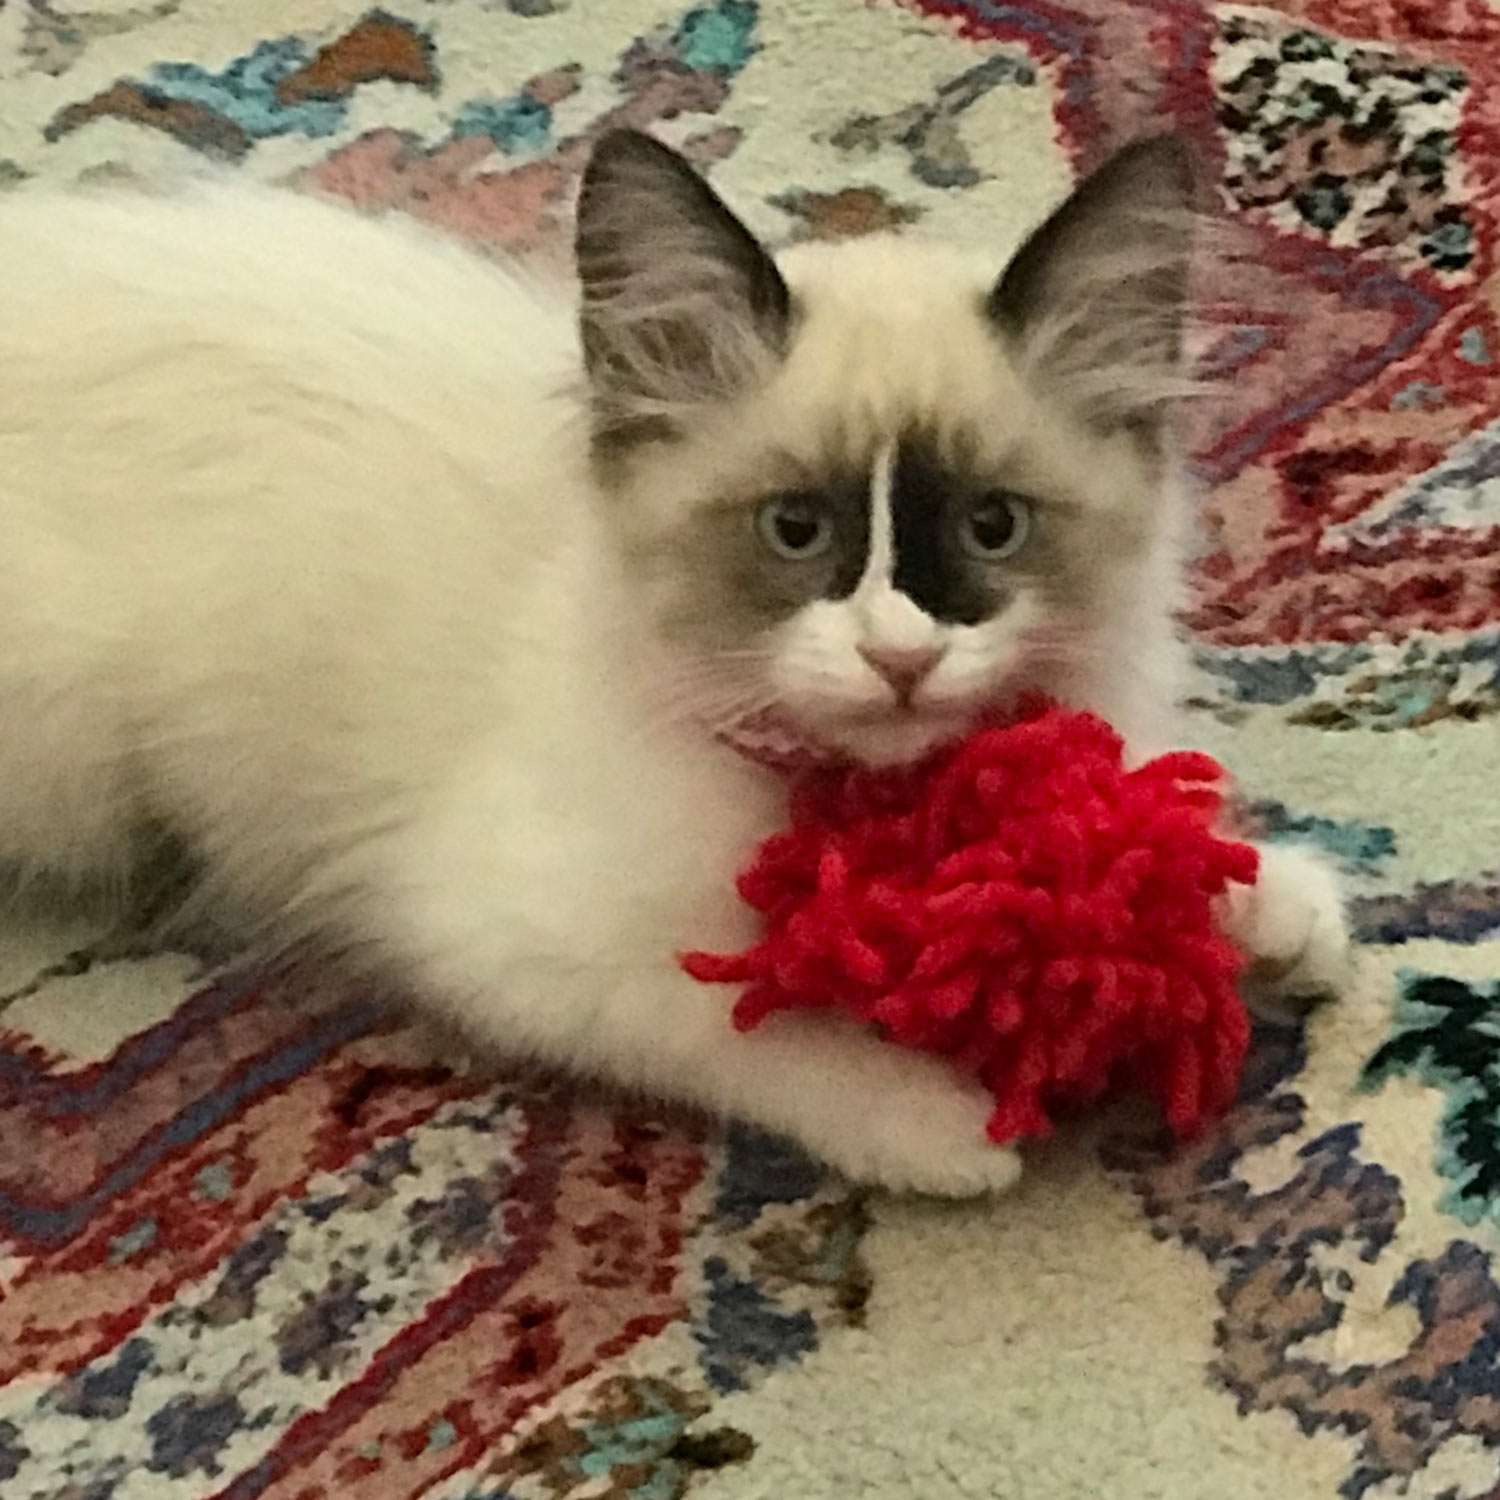 Trina s Shared a picture of her kitten smudgie adopted from animal care services in long beach california Smudgie loves her red yarn toy